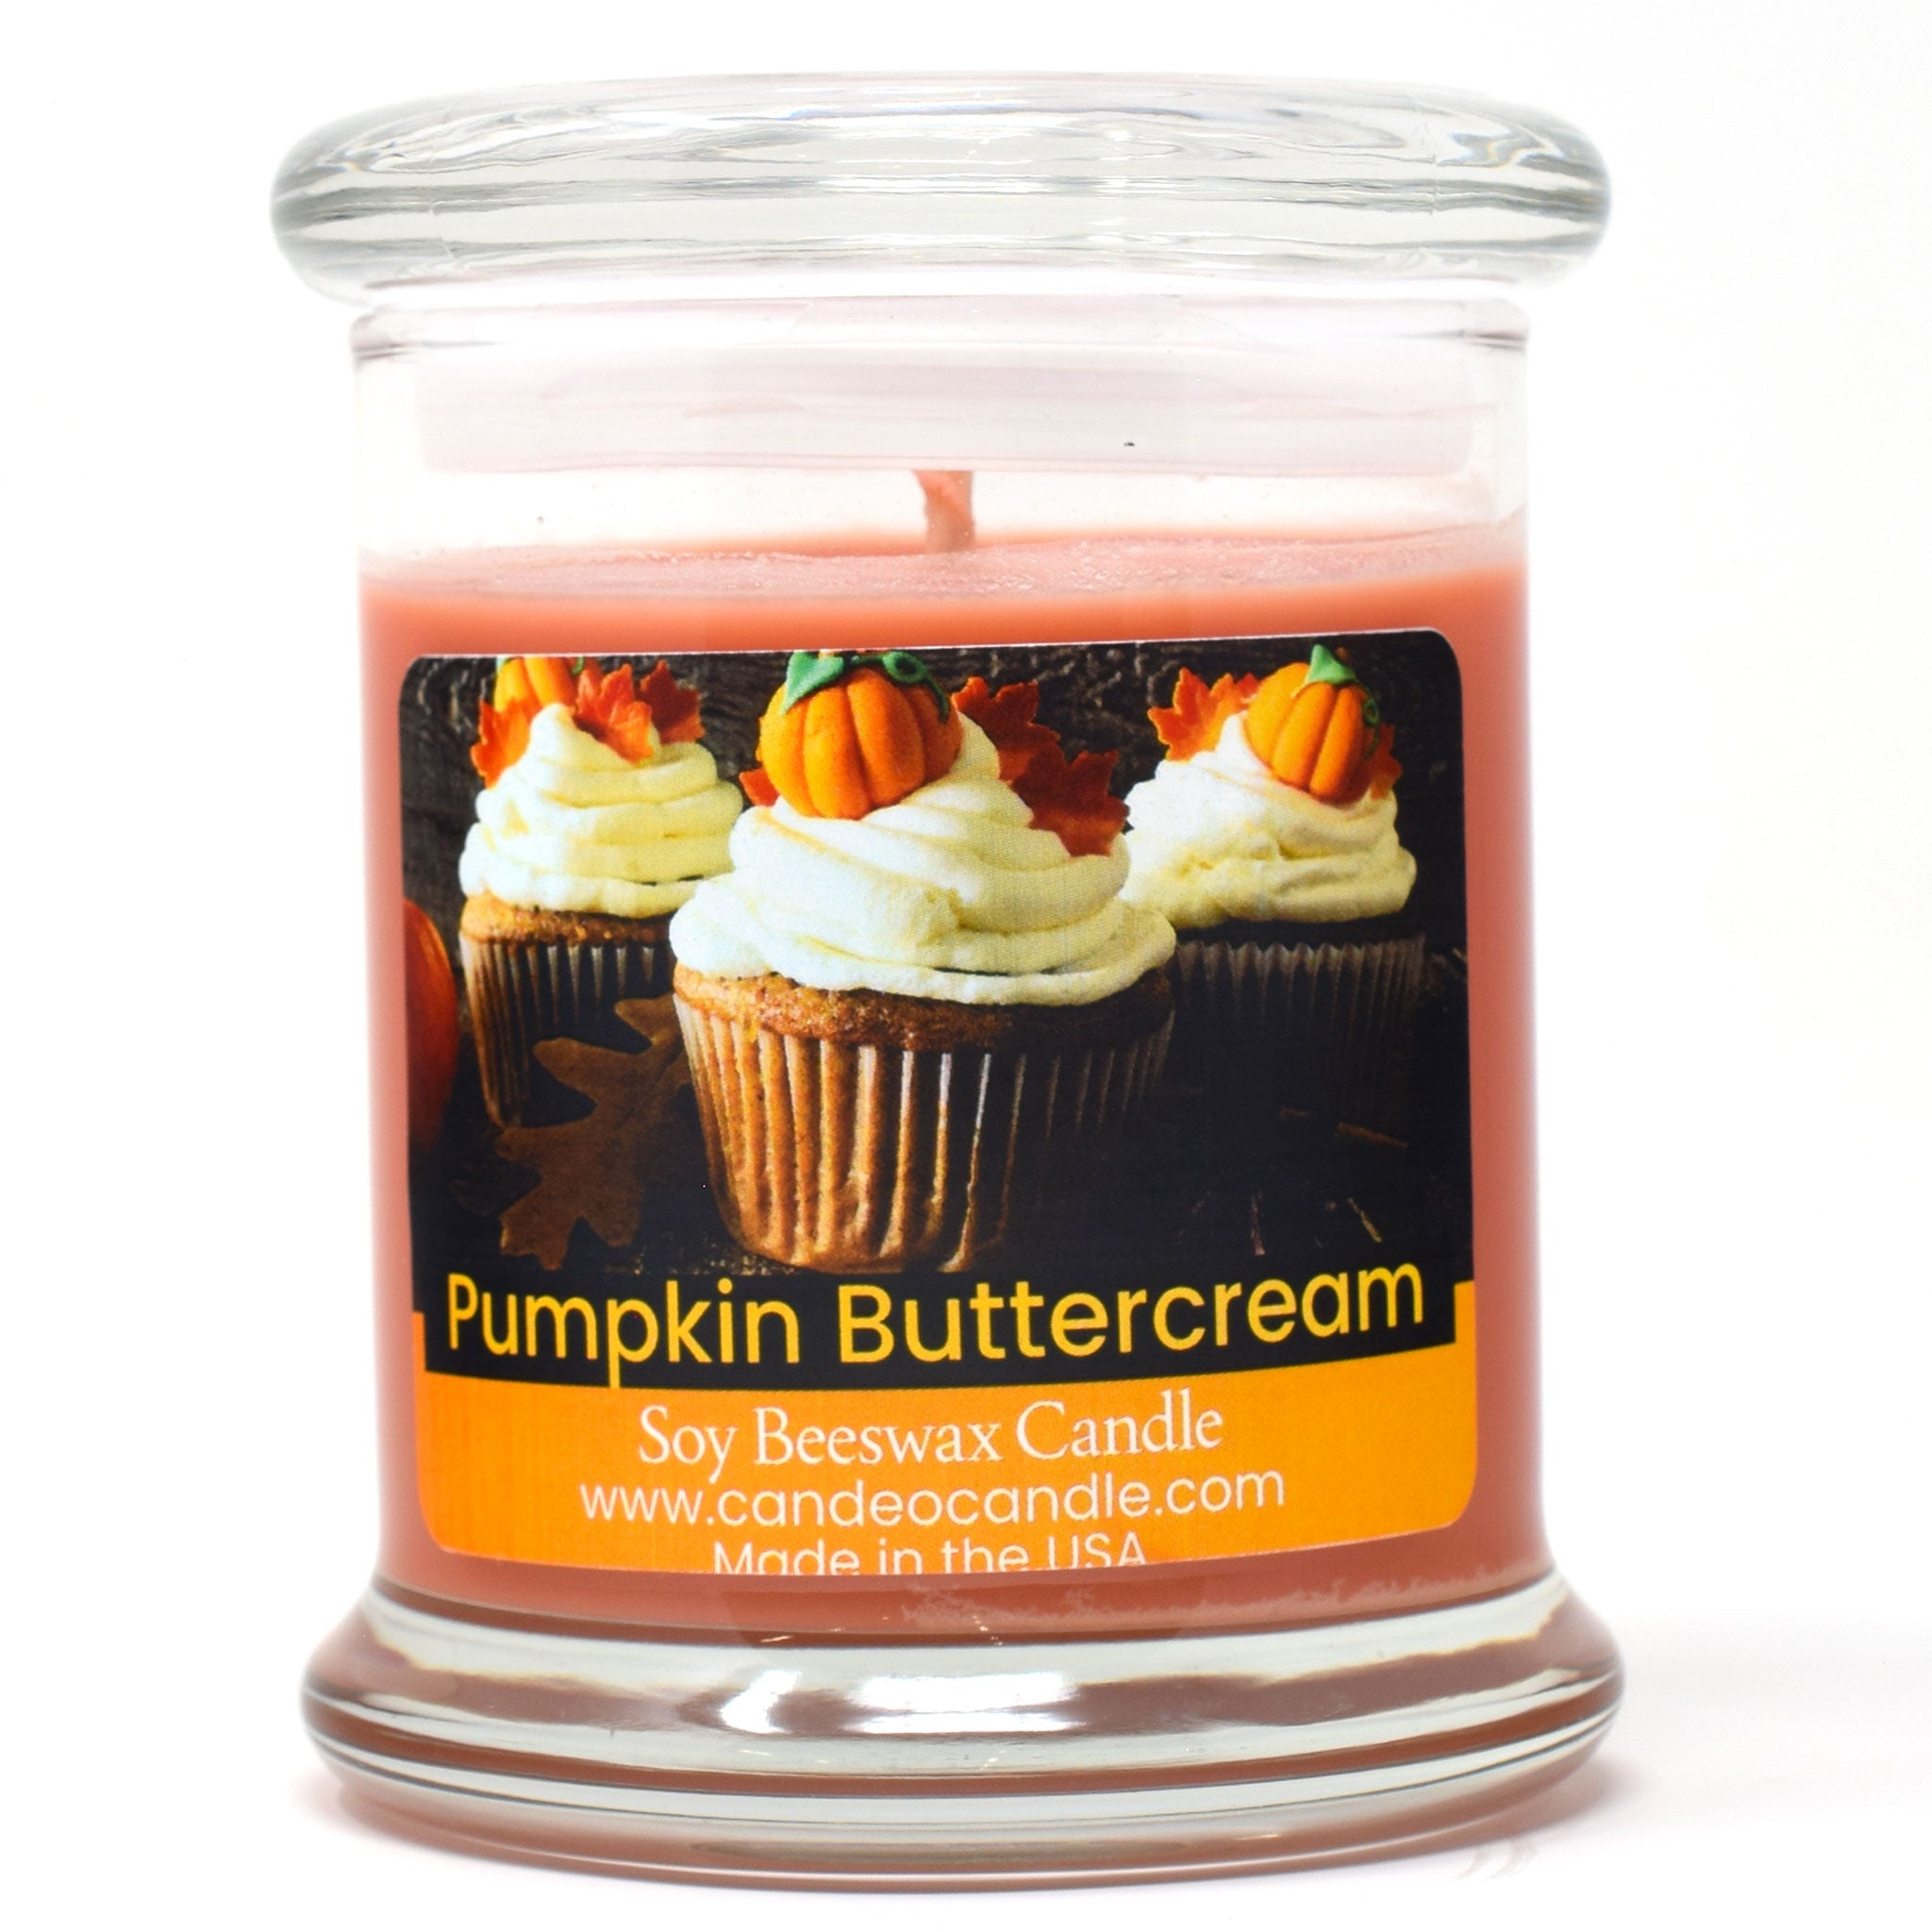 Pumpkin Buttercream, 9oz Soy Candle Jar - Candeo Candle